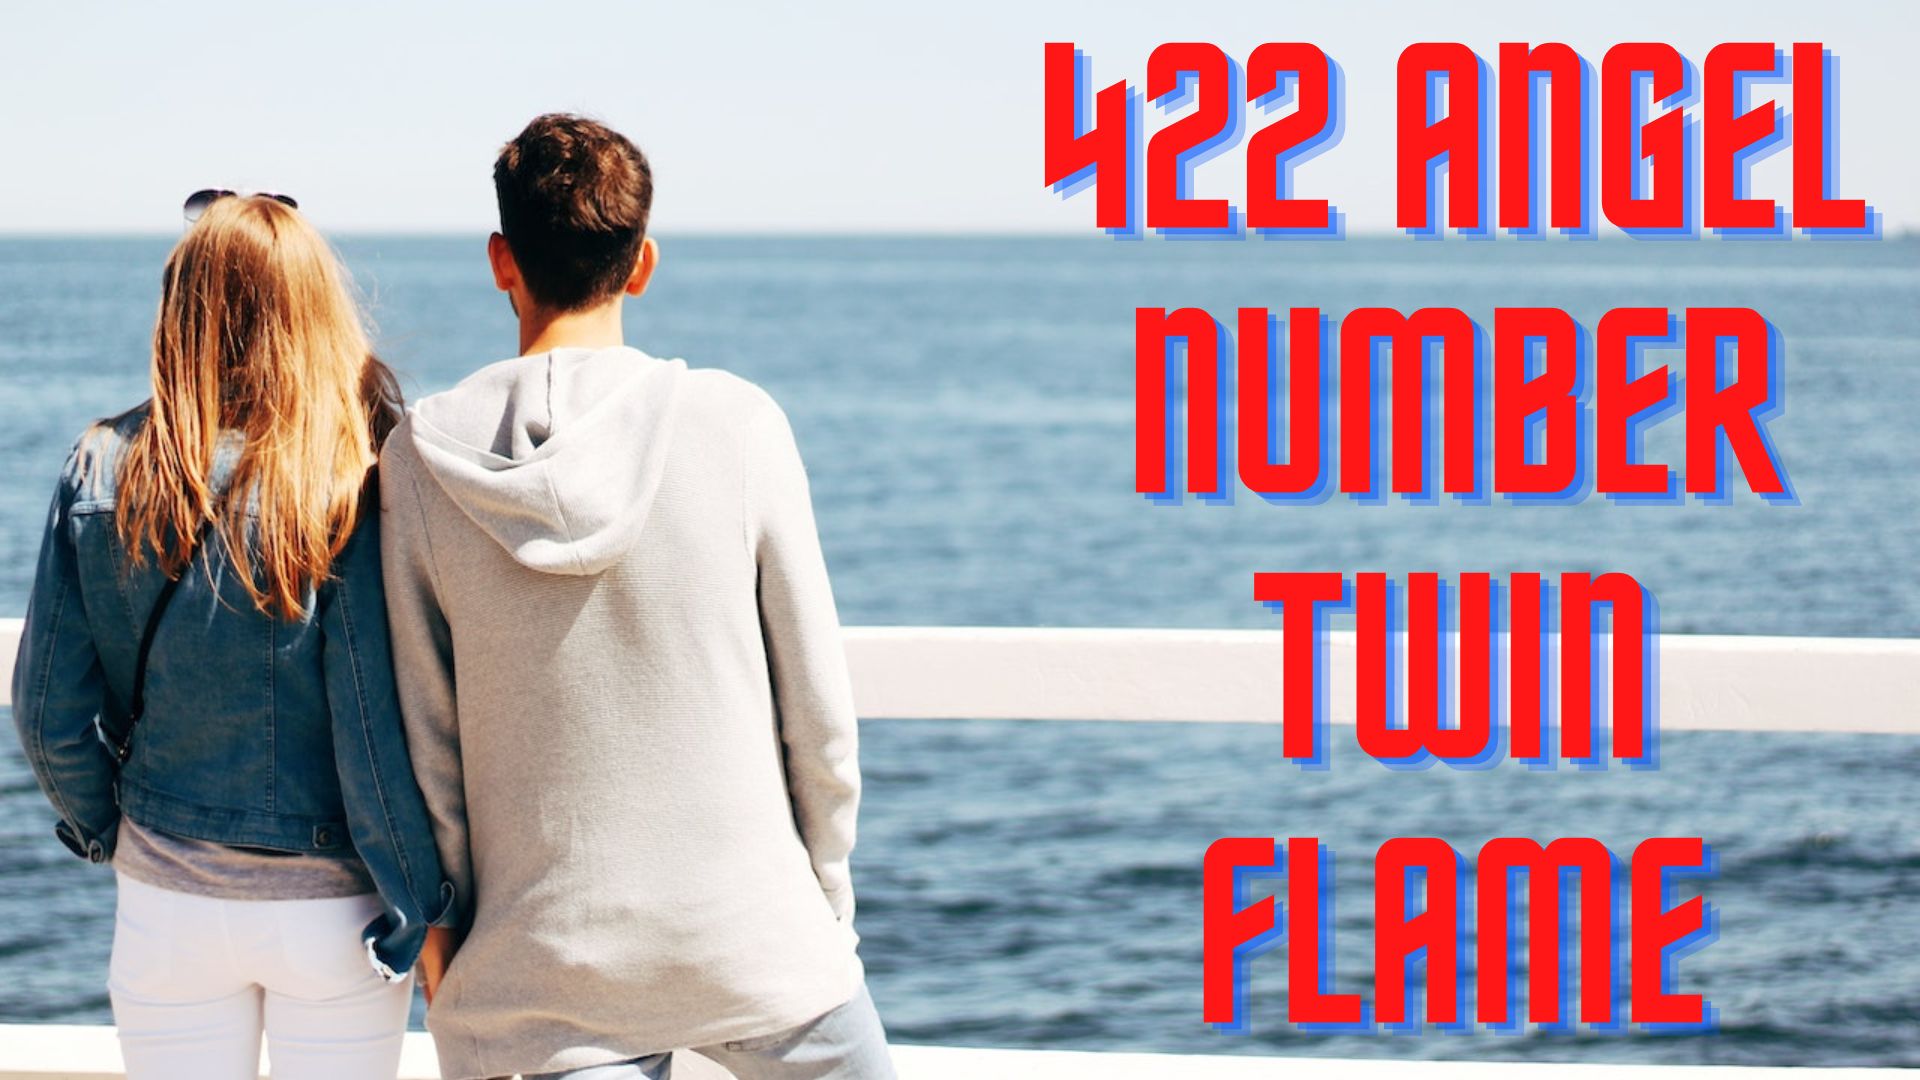 422 Angel Number Twin Flame Means That The Edge Will Be Connected Next